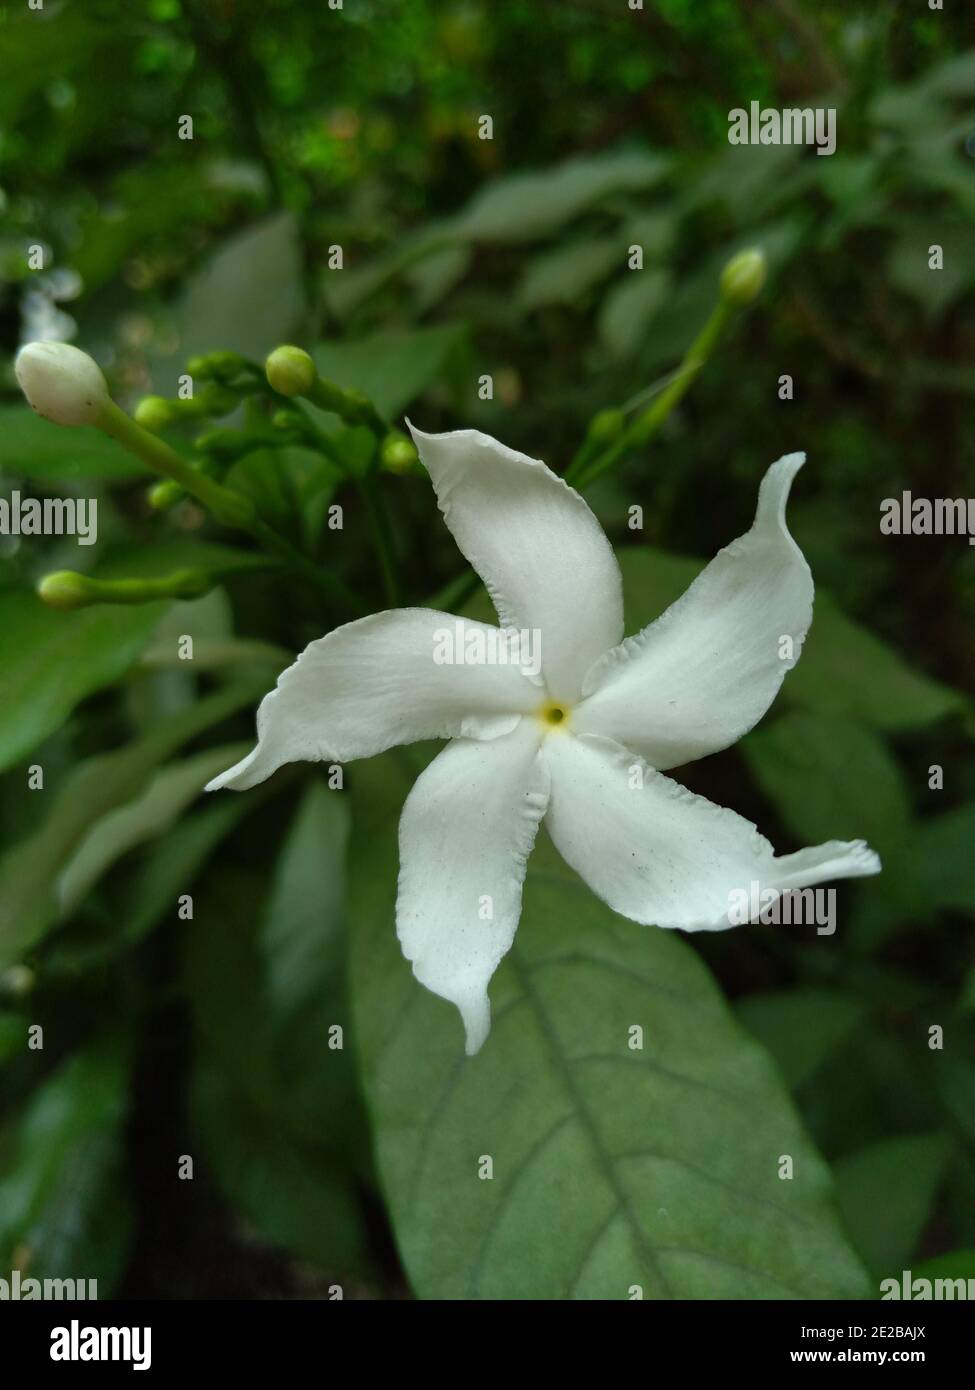 Vertical shot of a beautiful white flower jasmine Tabernaemontana on the blurred background Stock Photo